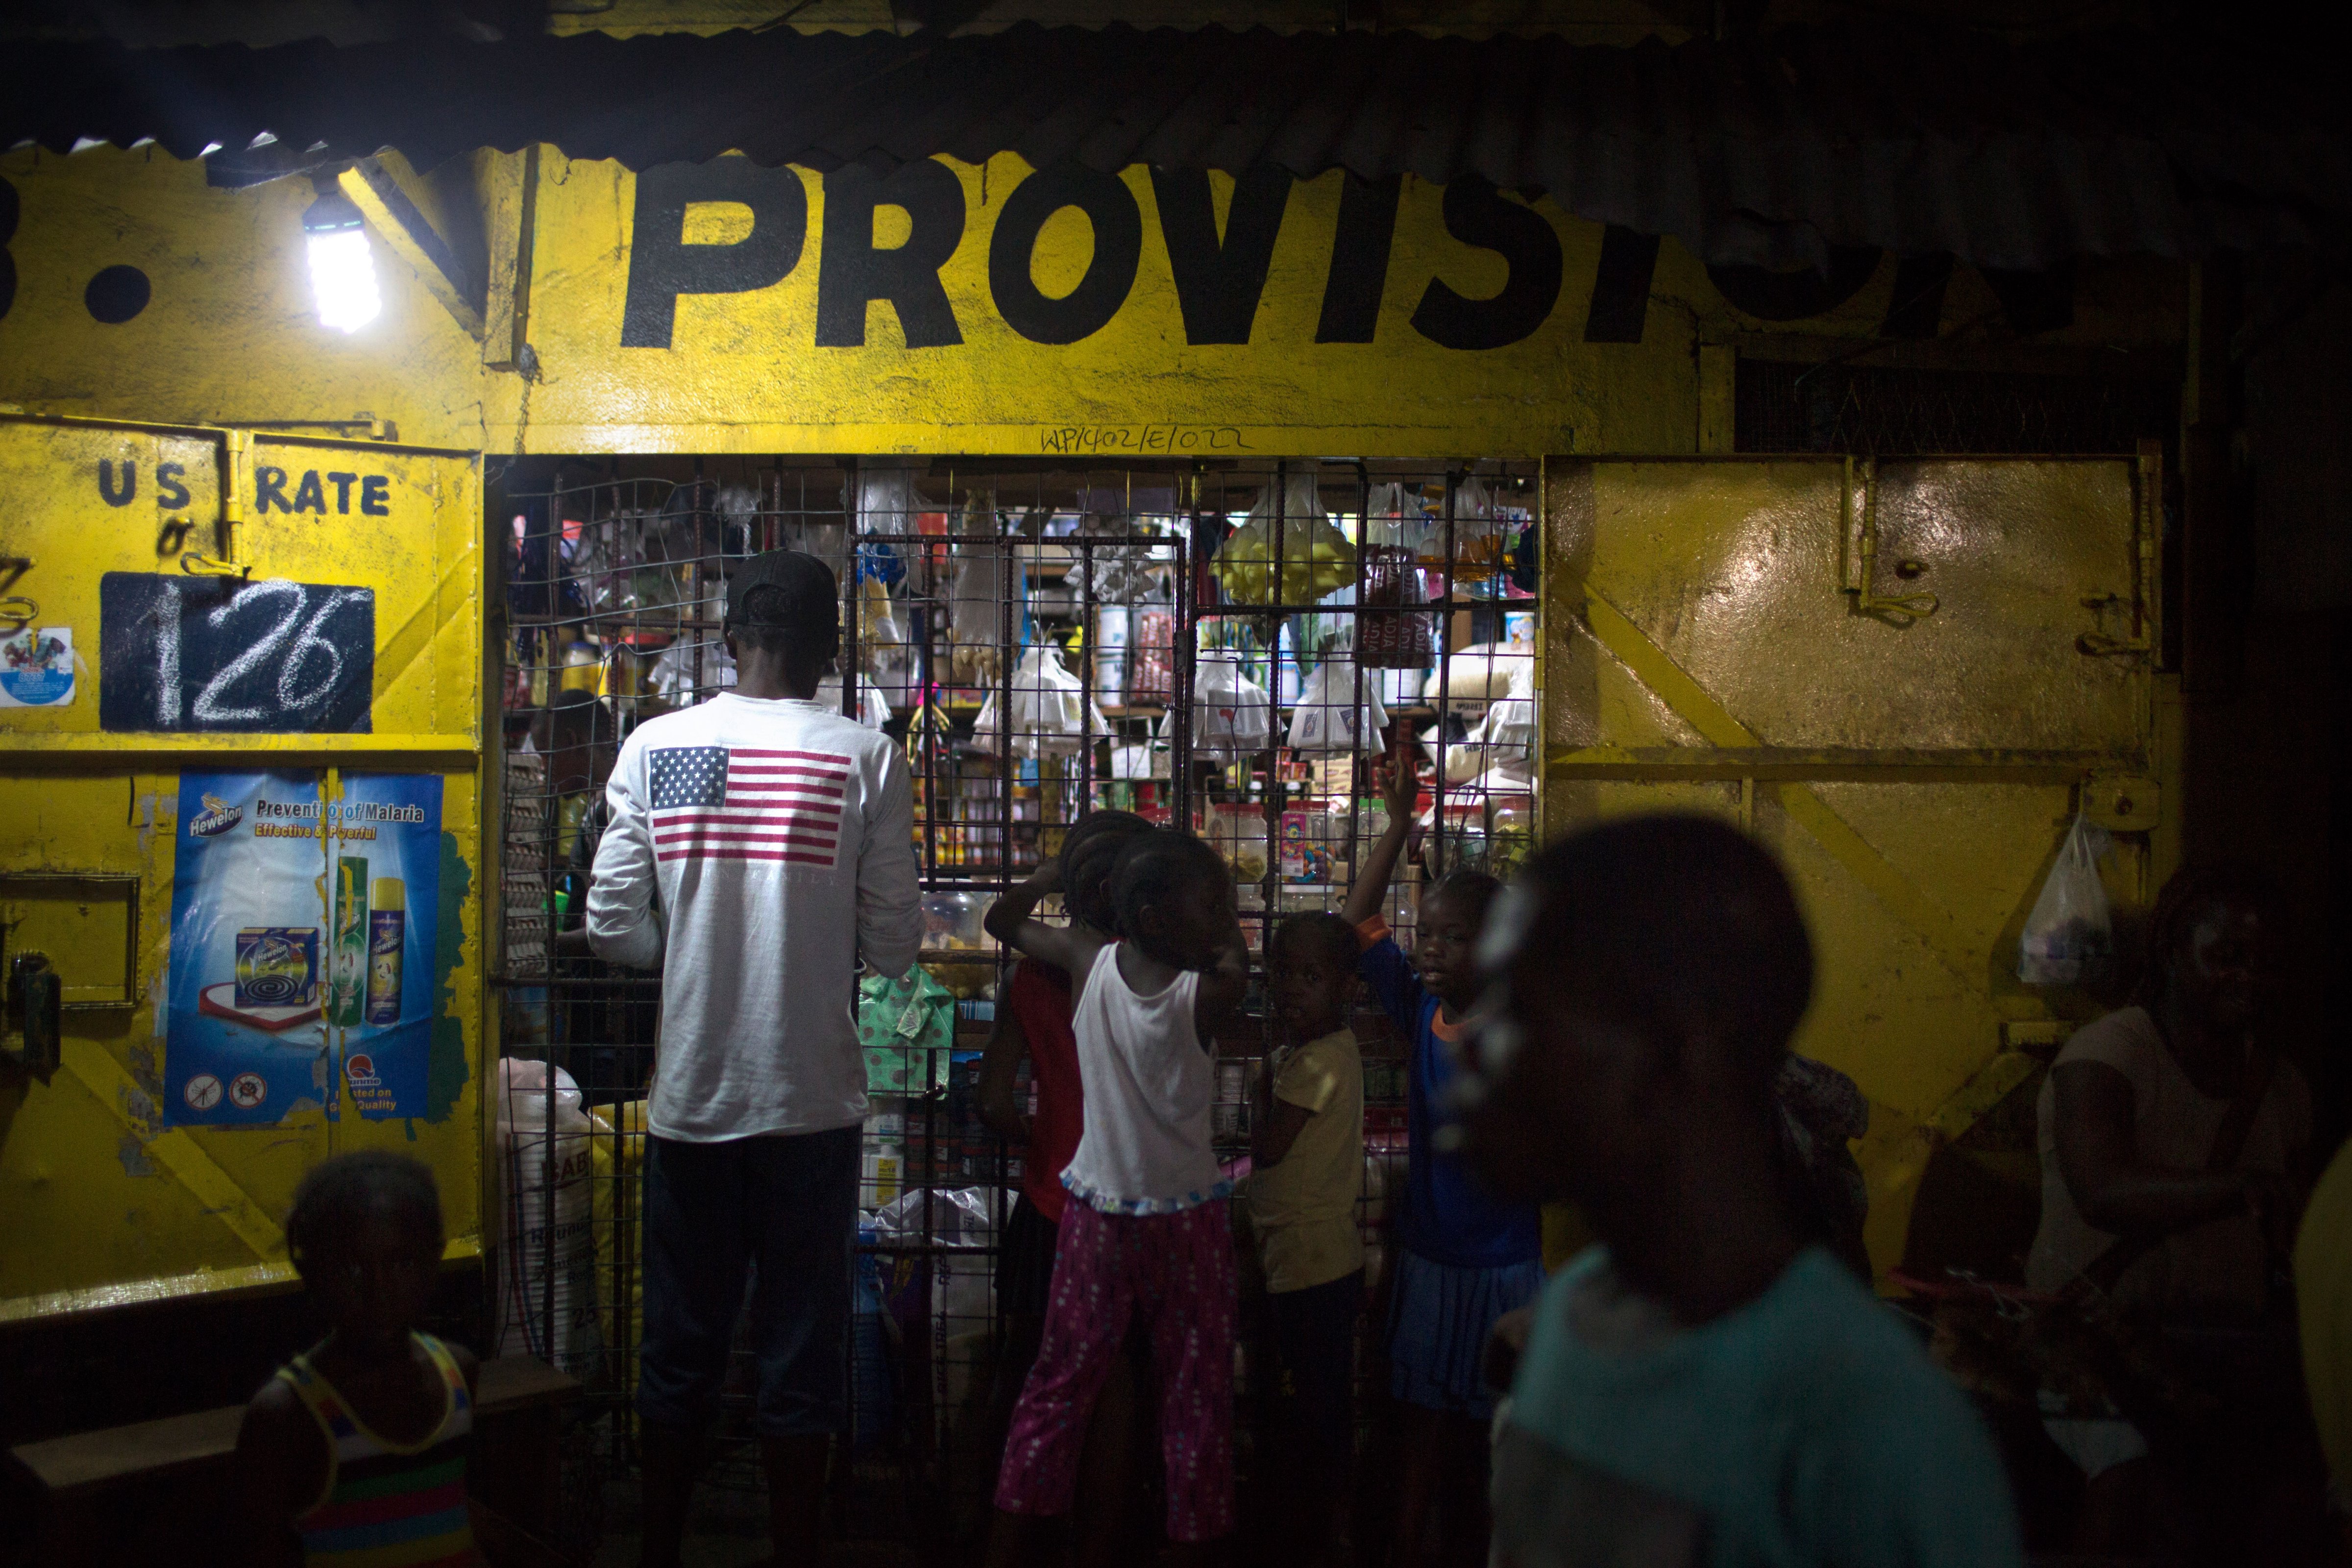 Patrons line up at a shop in the West Point community of Liberia's capital. More Than Me was created to educate girls who are from this community, many of whom are at risk of sexual exploitation. (Kathleen Flynn, special to ProPublica)